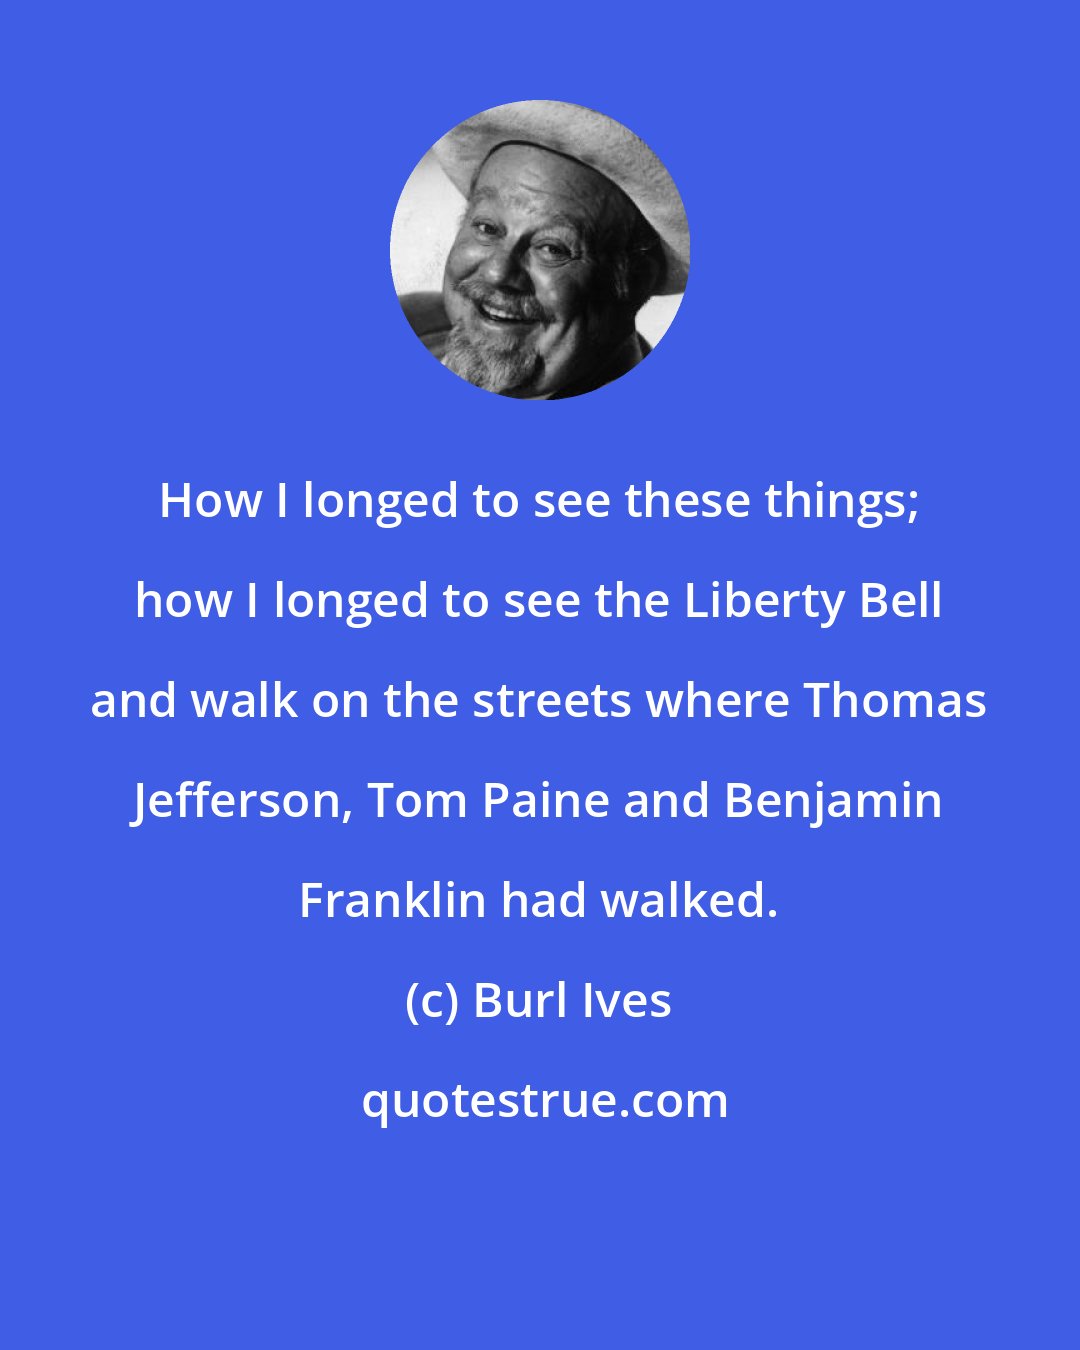 Burl Ives: How I longed to see these things; how I longed to see the Liberty Bell and walk on the streets where Thomas Jefferson, Tom Paine and Benjamin Franklin had walked.